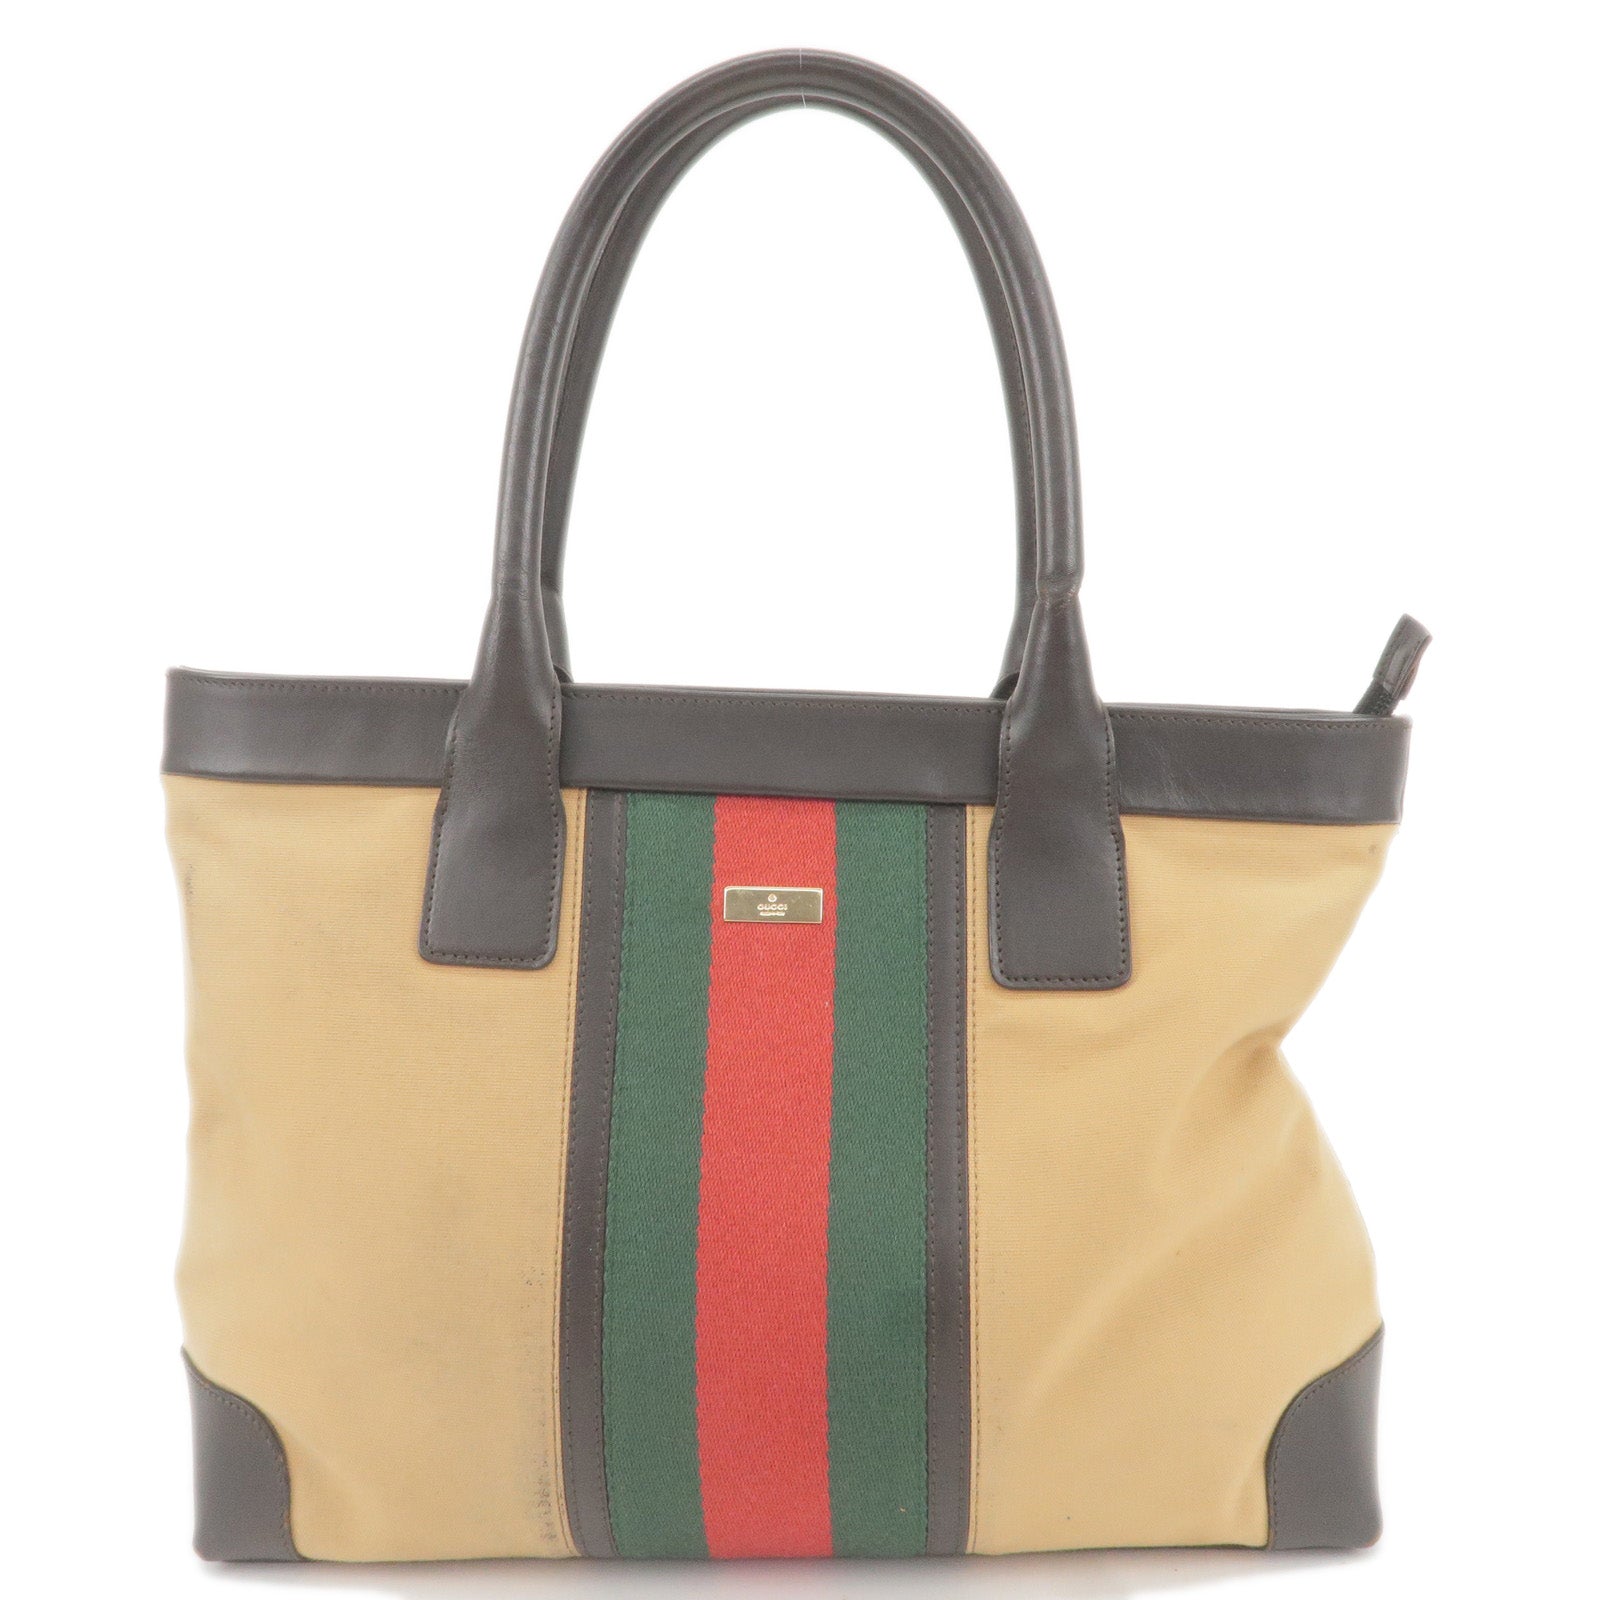 GUCCI-Sherry-Canvas-Leather-Tote-Bag-Hand-Bag-Beige-002.119